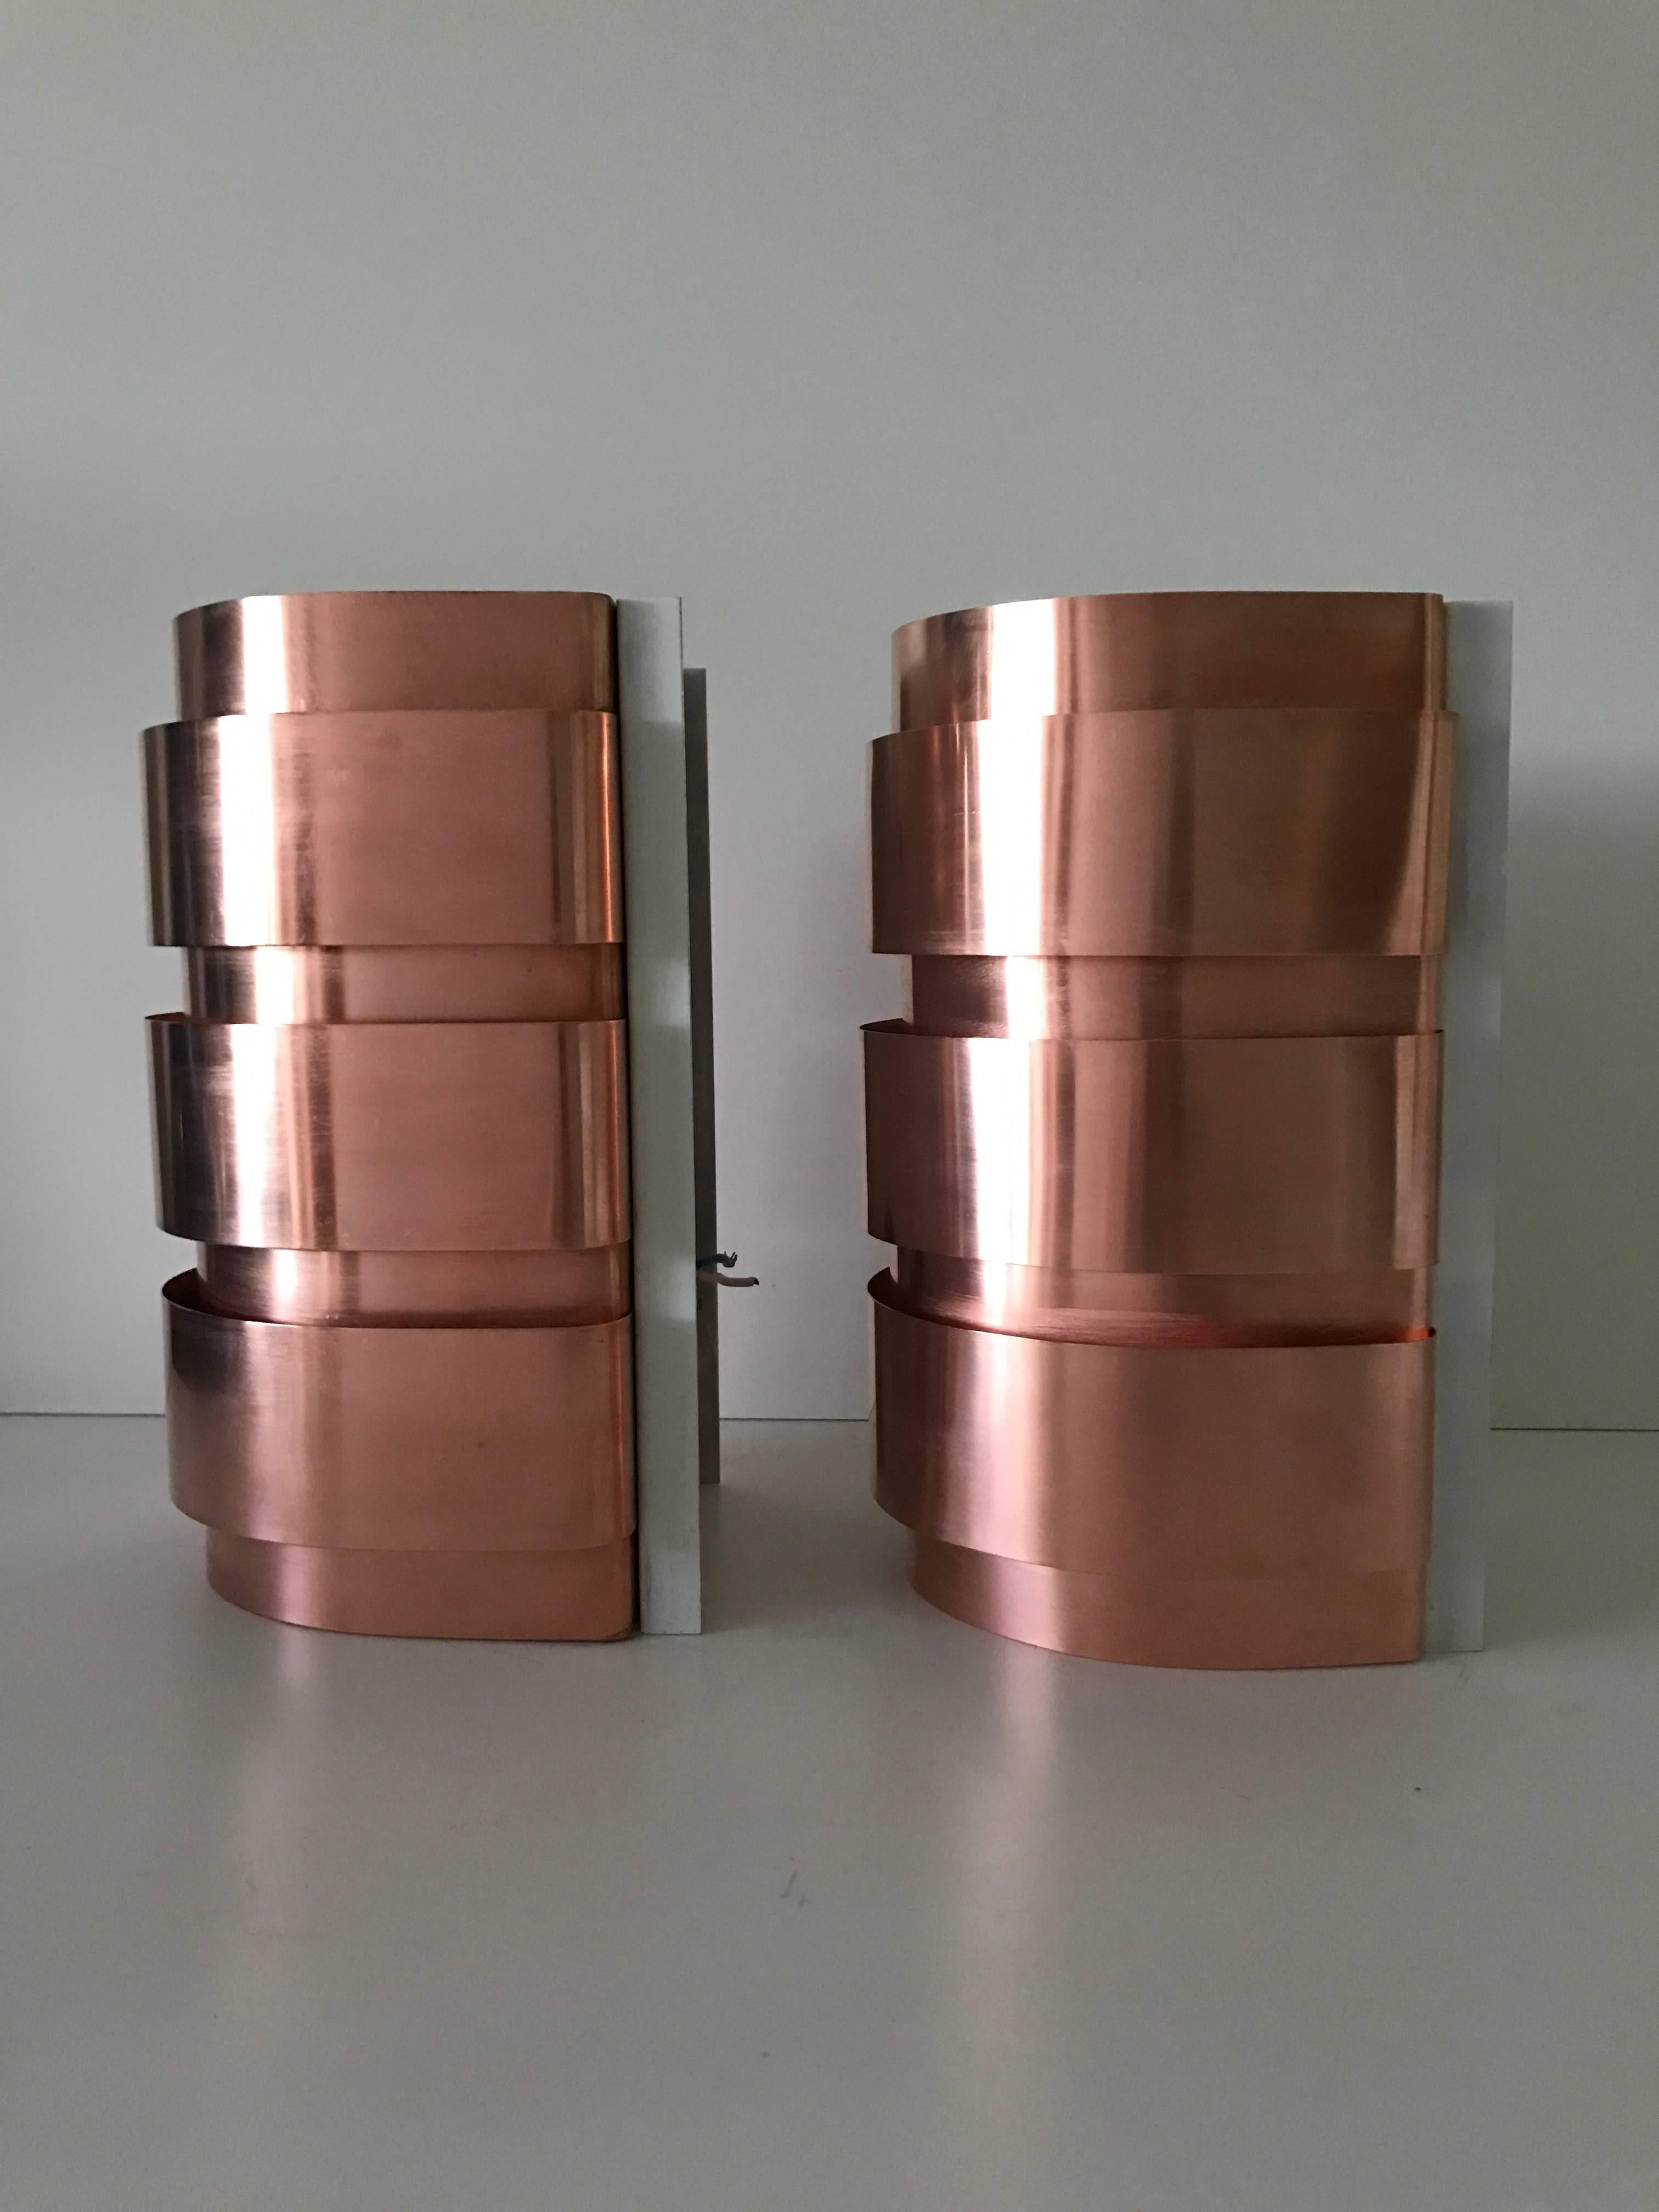 Pair of Swedish Hans Agne copper wall lamps model V155/K.
A nice pair of wall lamps made of copper and designed by Hans Agne Jakobsson for Markaryd Sweden.
These lamps are 28cm in height, 17cm wide and 16cm deep.
They will be delivered with new